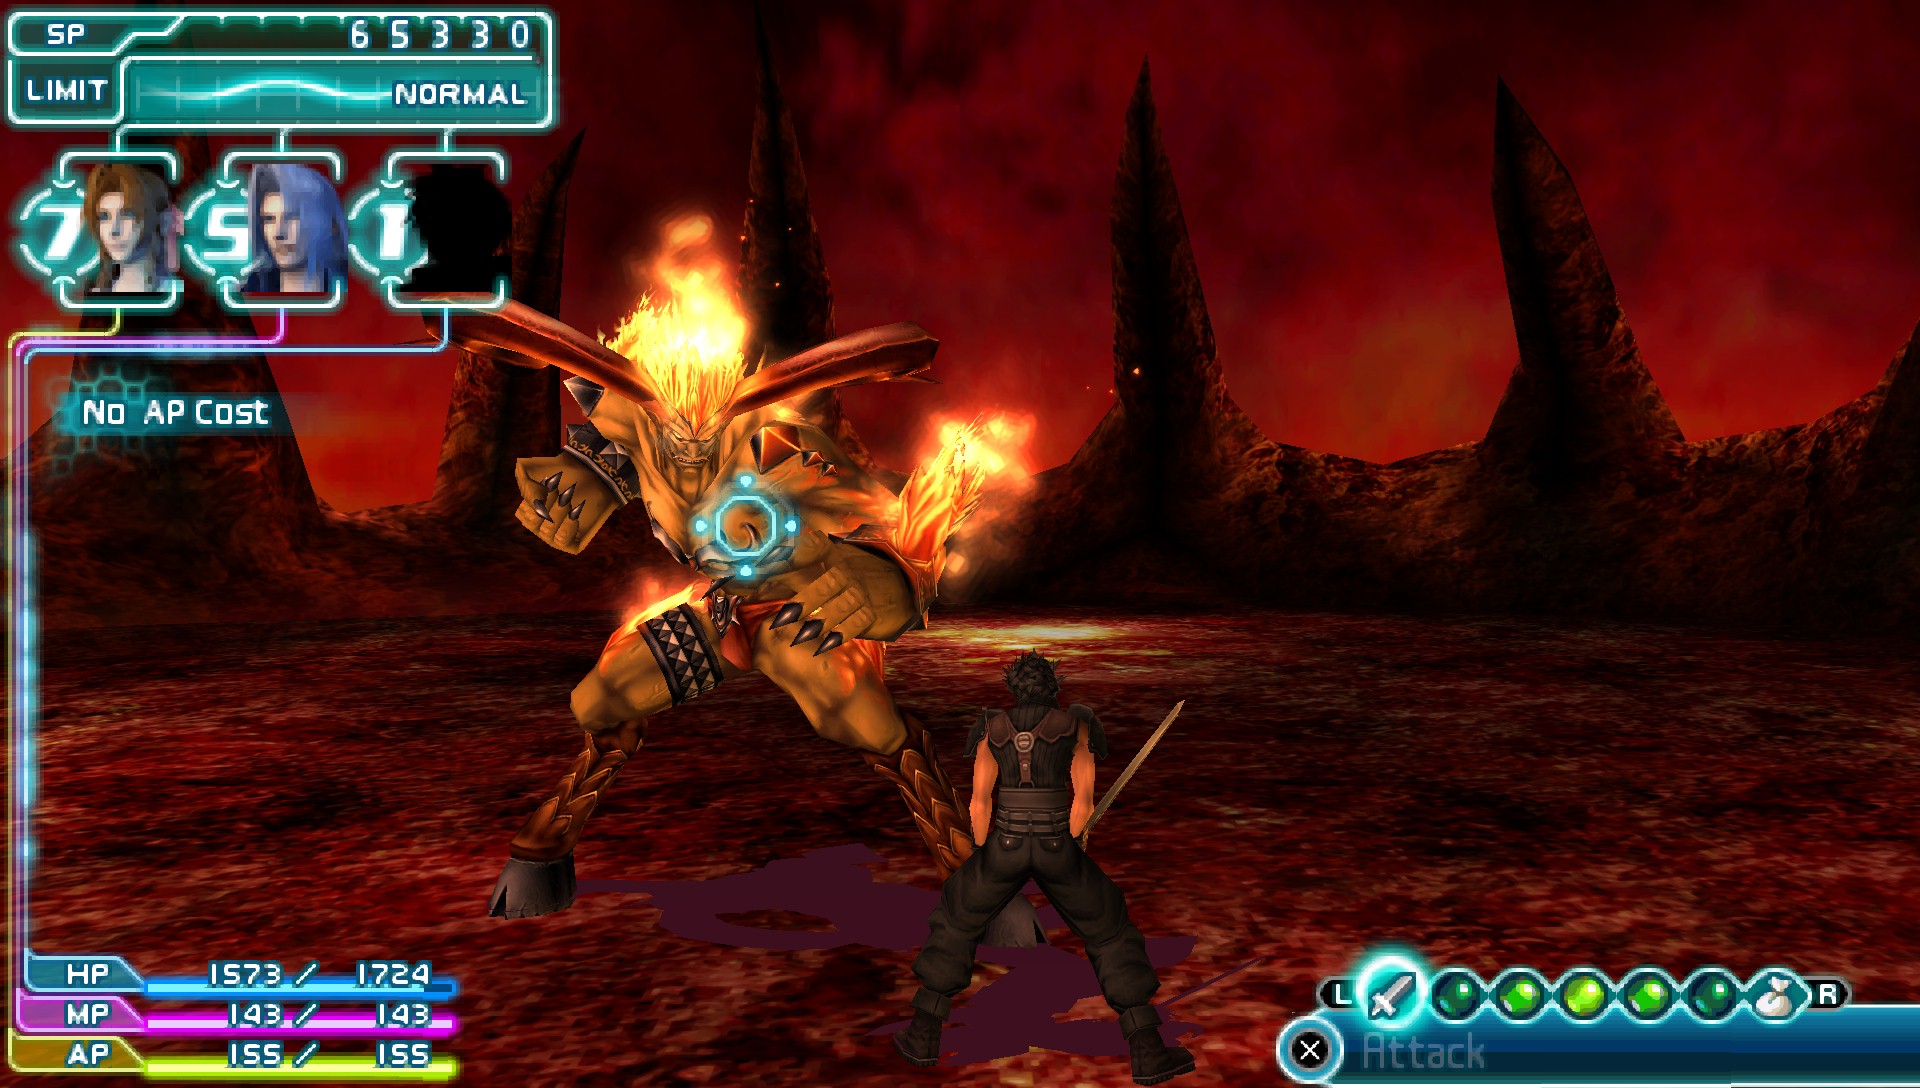 Best Settings For Crisis Core Ppsspp 1.1